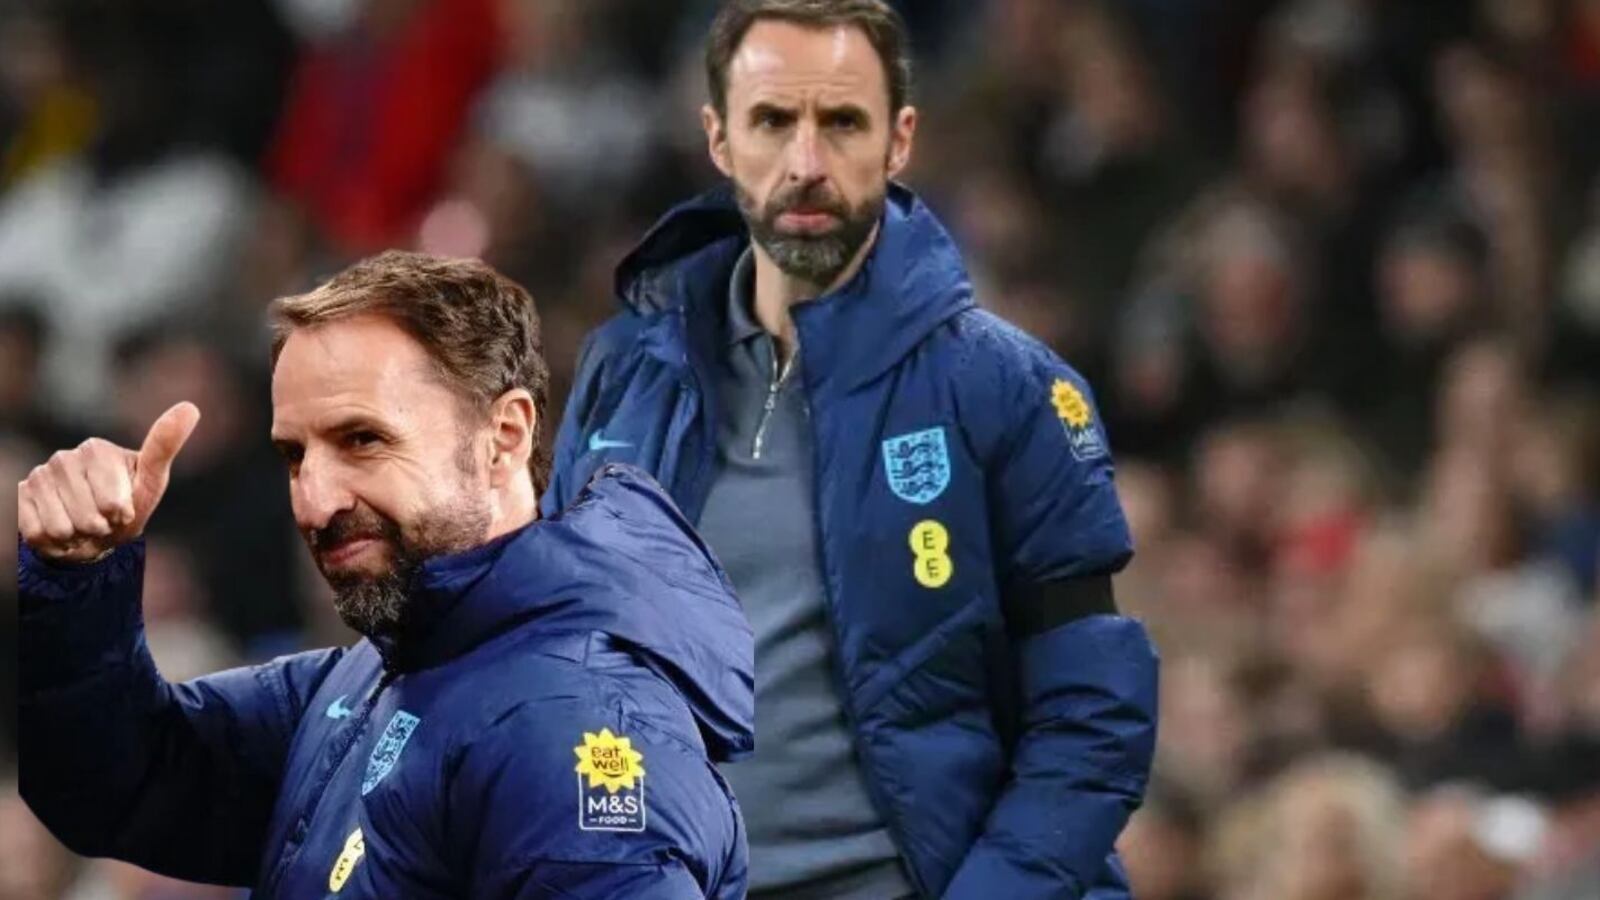 Gareth Southgate's goal with the Three Lions isn't solely sports-related; here are the details